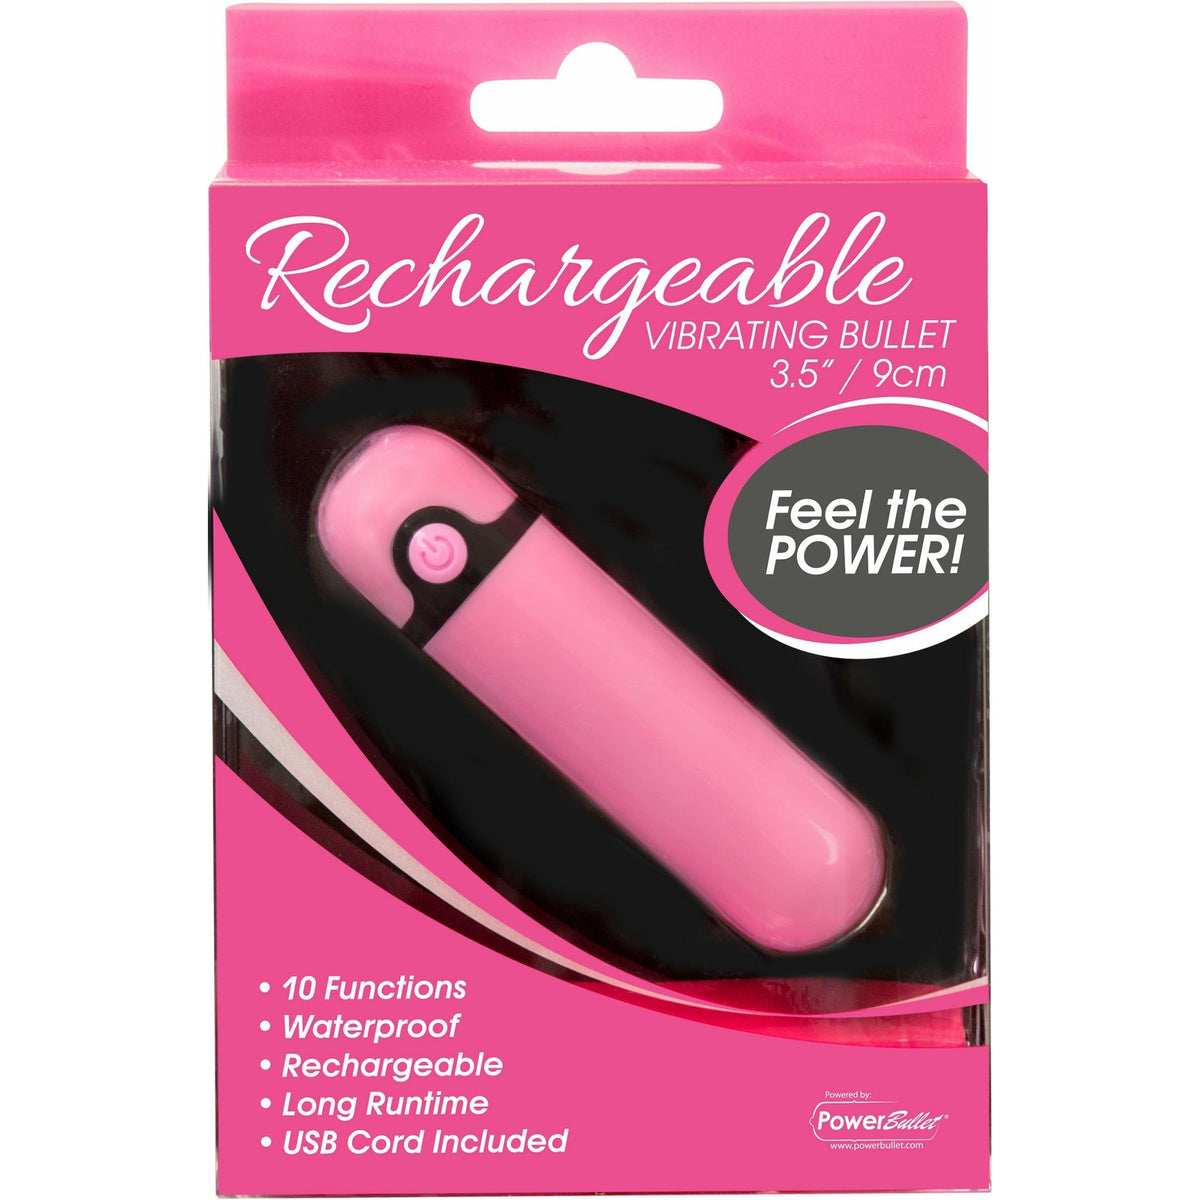 PowerBullet Simple and True - Rechargeable Vibrating Bullet - Pink